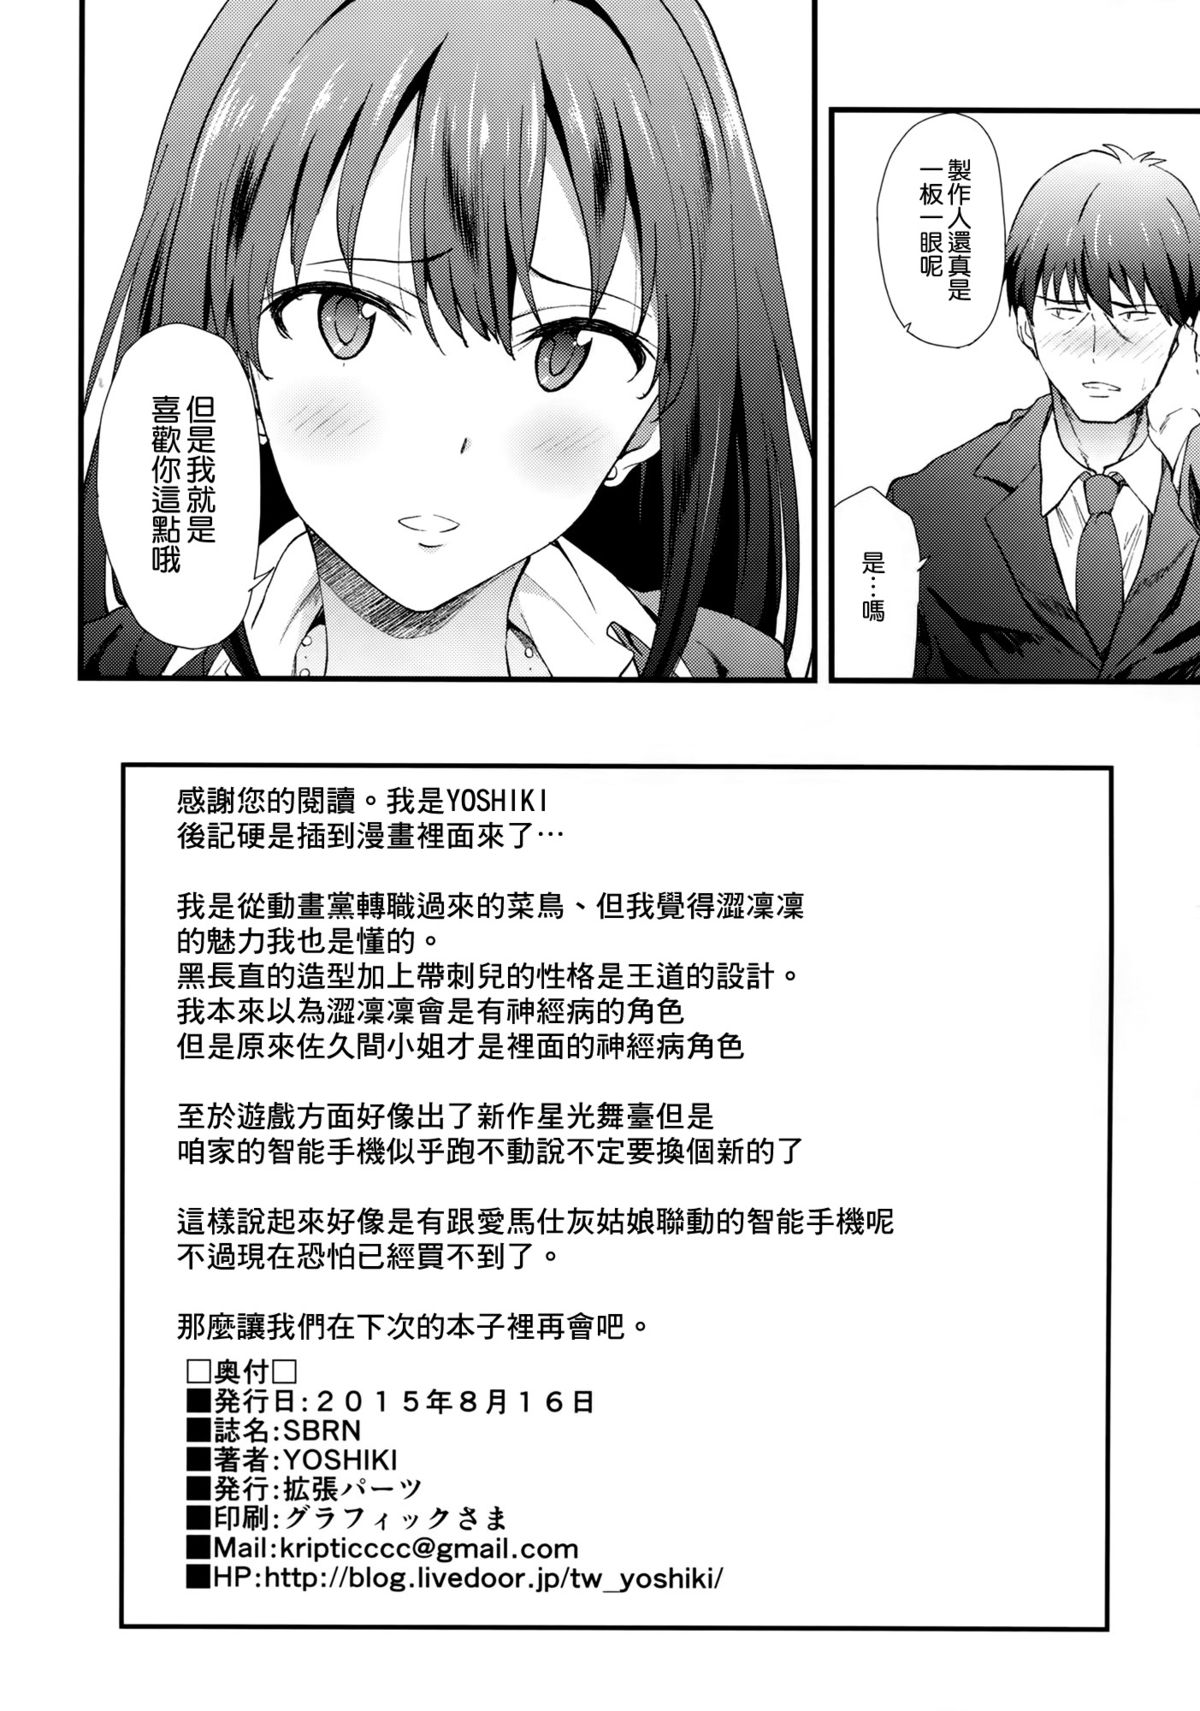 (C88) [EXTENDED PART (YOSHIKI)] SBRN (THE IDOLM@STER CINDERELLA GIRLS) [Chinese] [空気系☆漢化] page 22 full